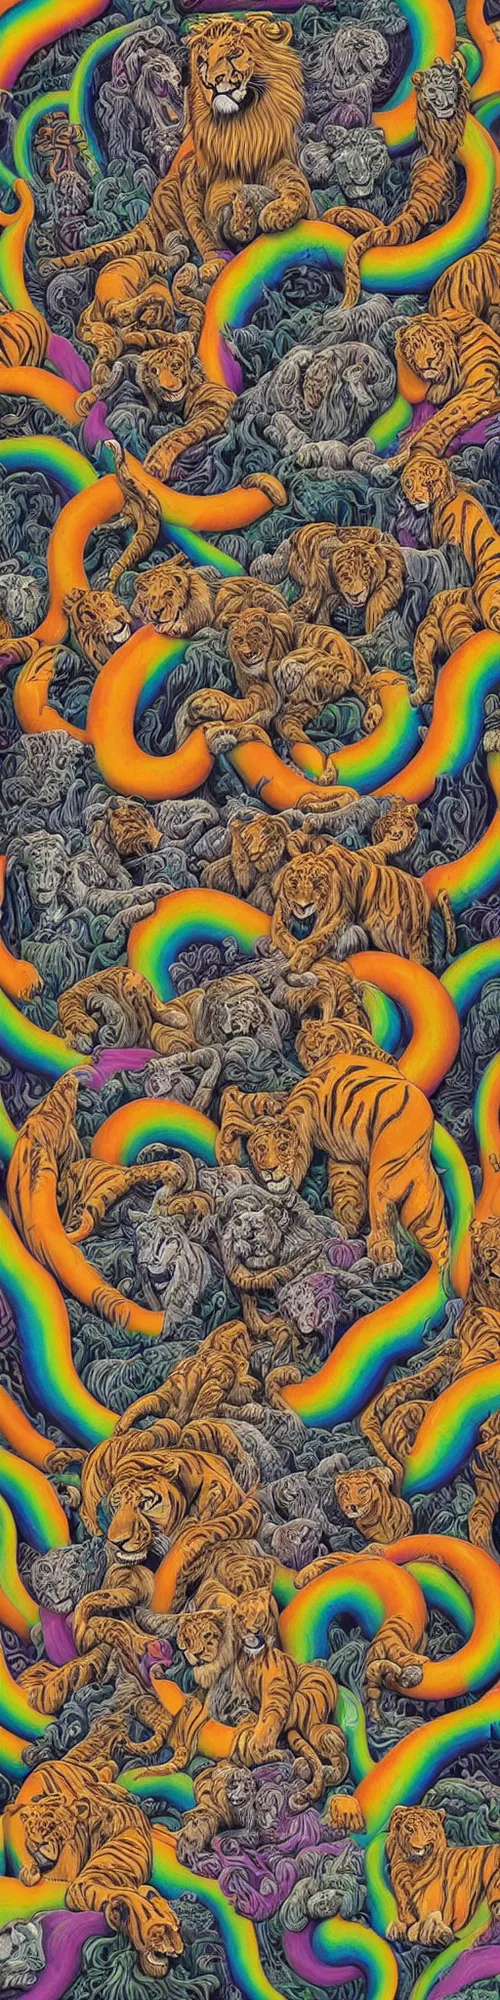 Prompt: lions and tiger and bears dissolving into melted liquid braids, cubensis, aztec, basil wolverton, r crumb, hr giger, mc escher, dali, muted but vibrant colors, rainbow tubing,